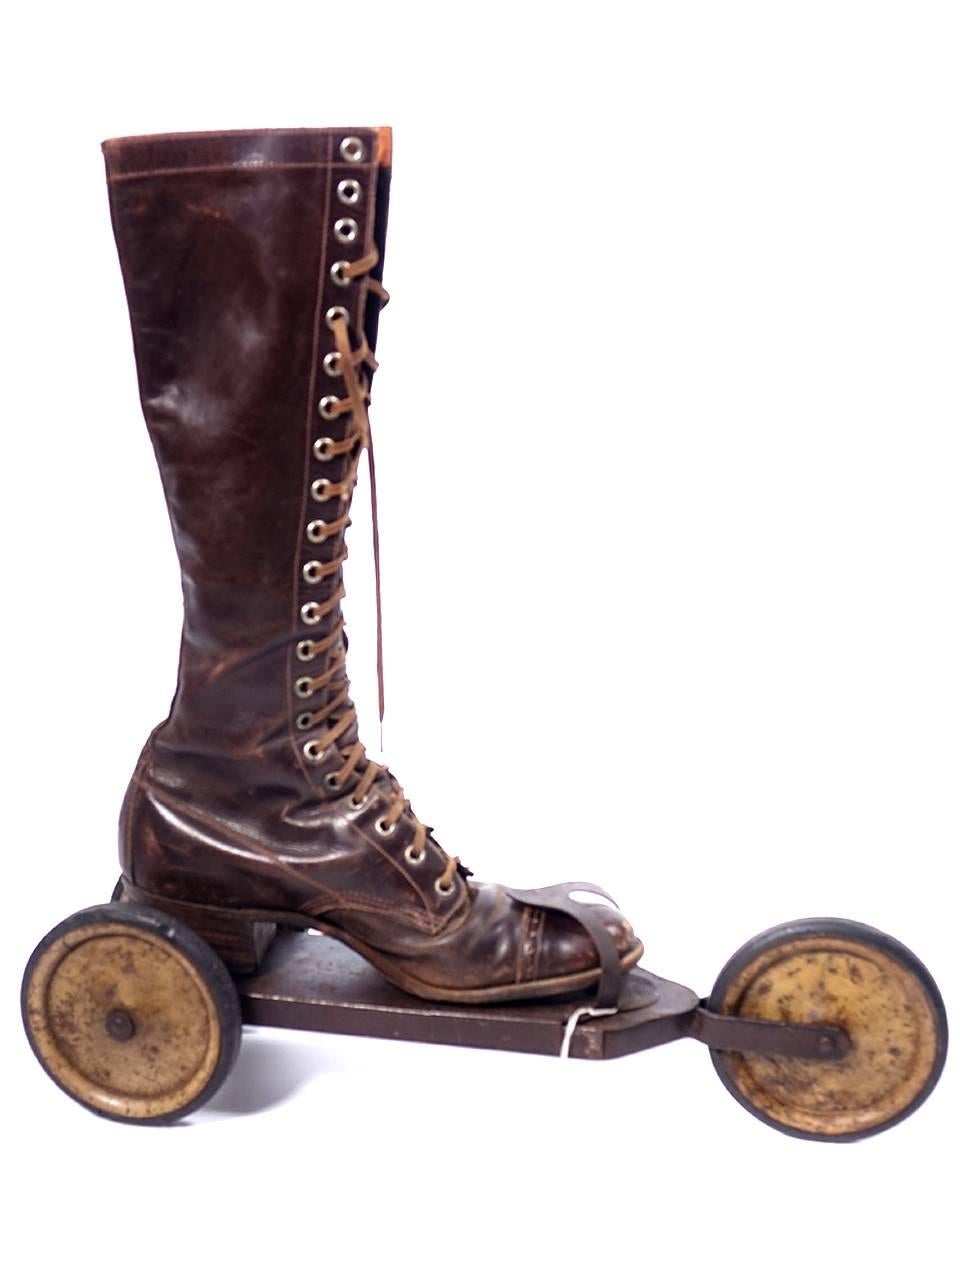 This is a rather unusual and rare pair of three-wheeled roller skates from the early 20th century. They are made of metal, with hard-rubber treads on the wheels; each skate is 16 inches long. There is no makers mark. Some research brought up skates